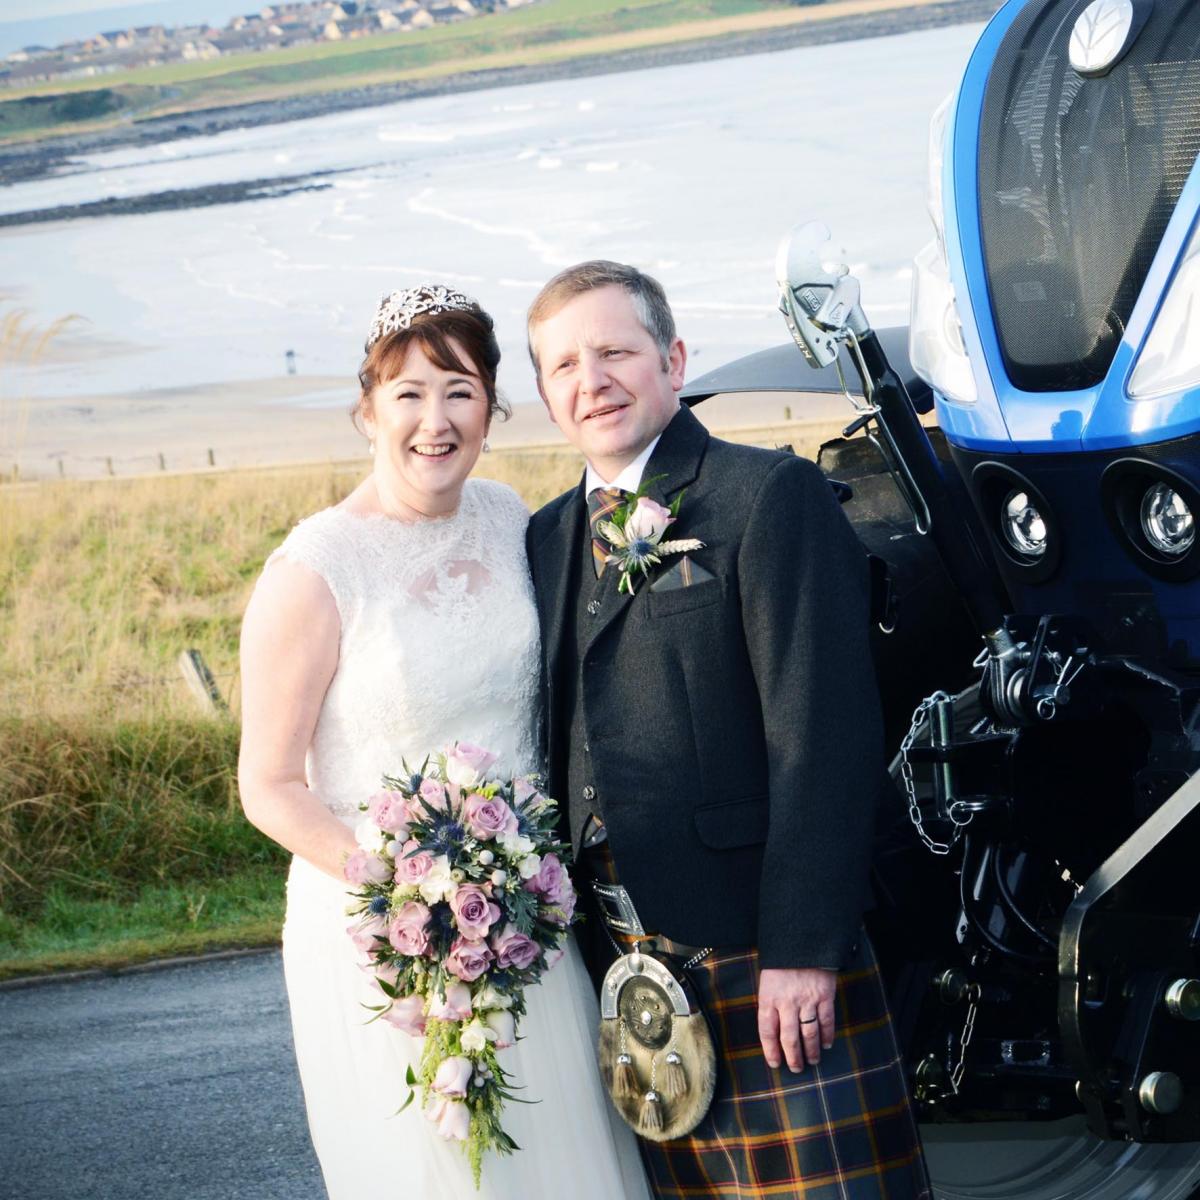 Stuart Connon, Skilmaflly, Auchnagatt, and Morag Sinclair, Longside, now both of Ellon, were married at the Banff Springs
Photo: Deeside Photographics, Banchory

